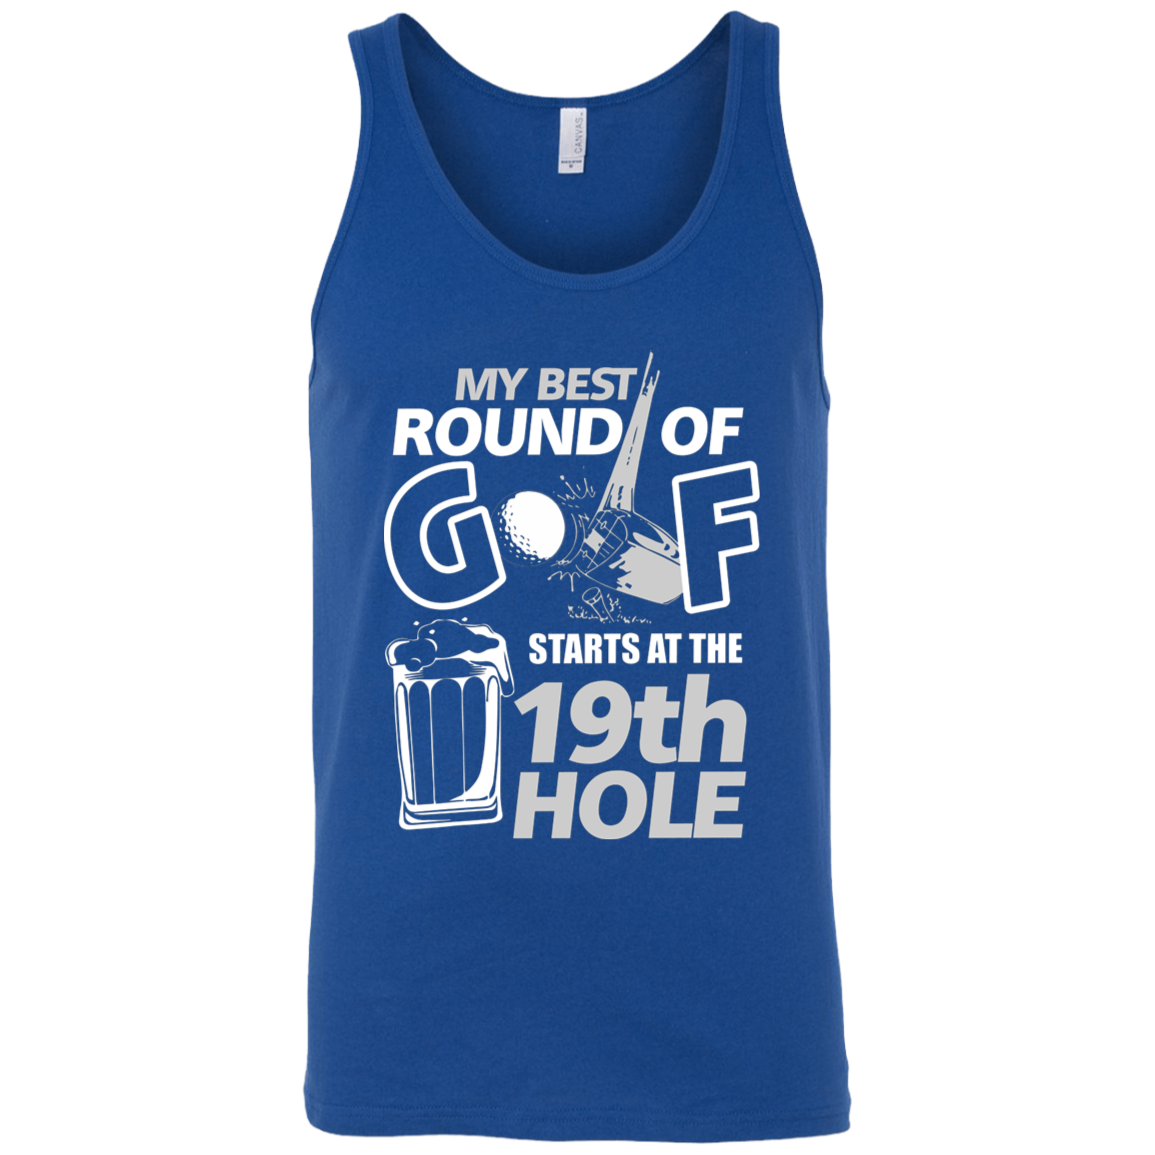 My Best Round Of Golf Starts At The 19th Hole Tank Top Apparel - The Beer Lodge